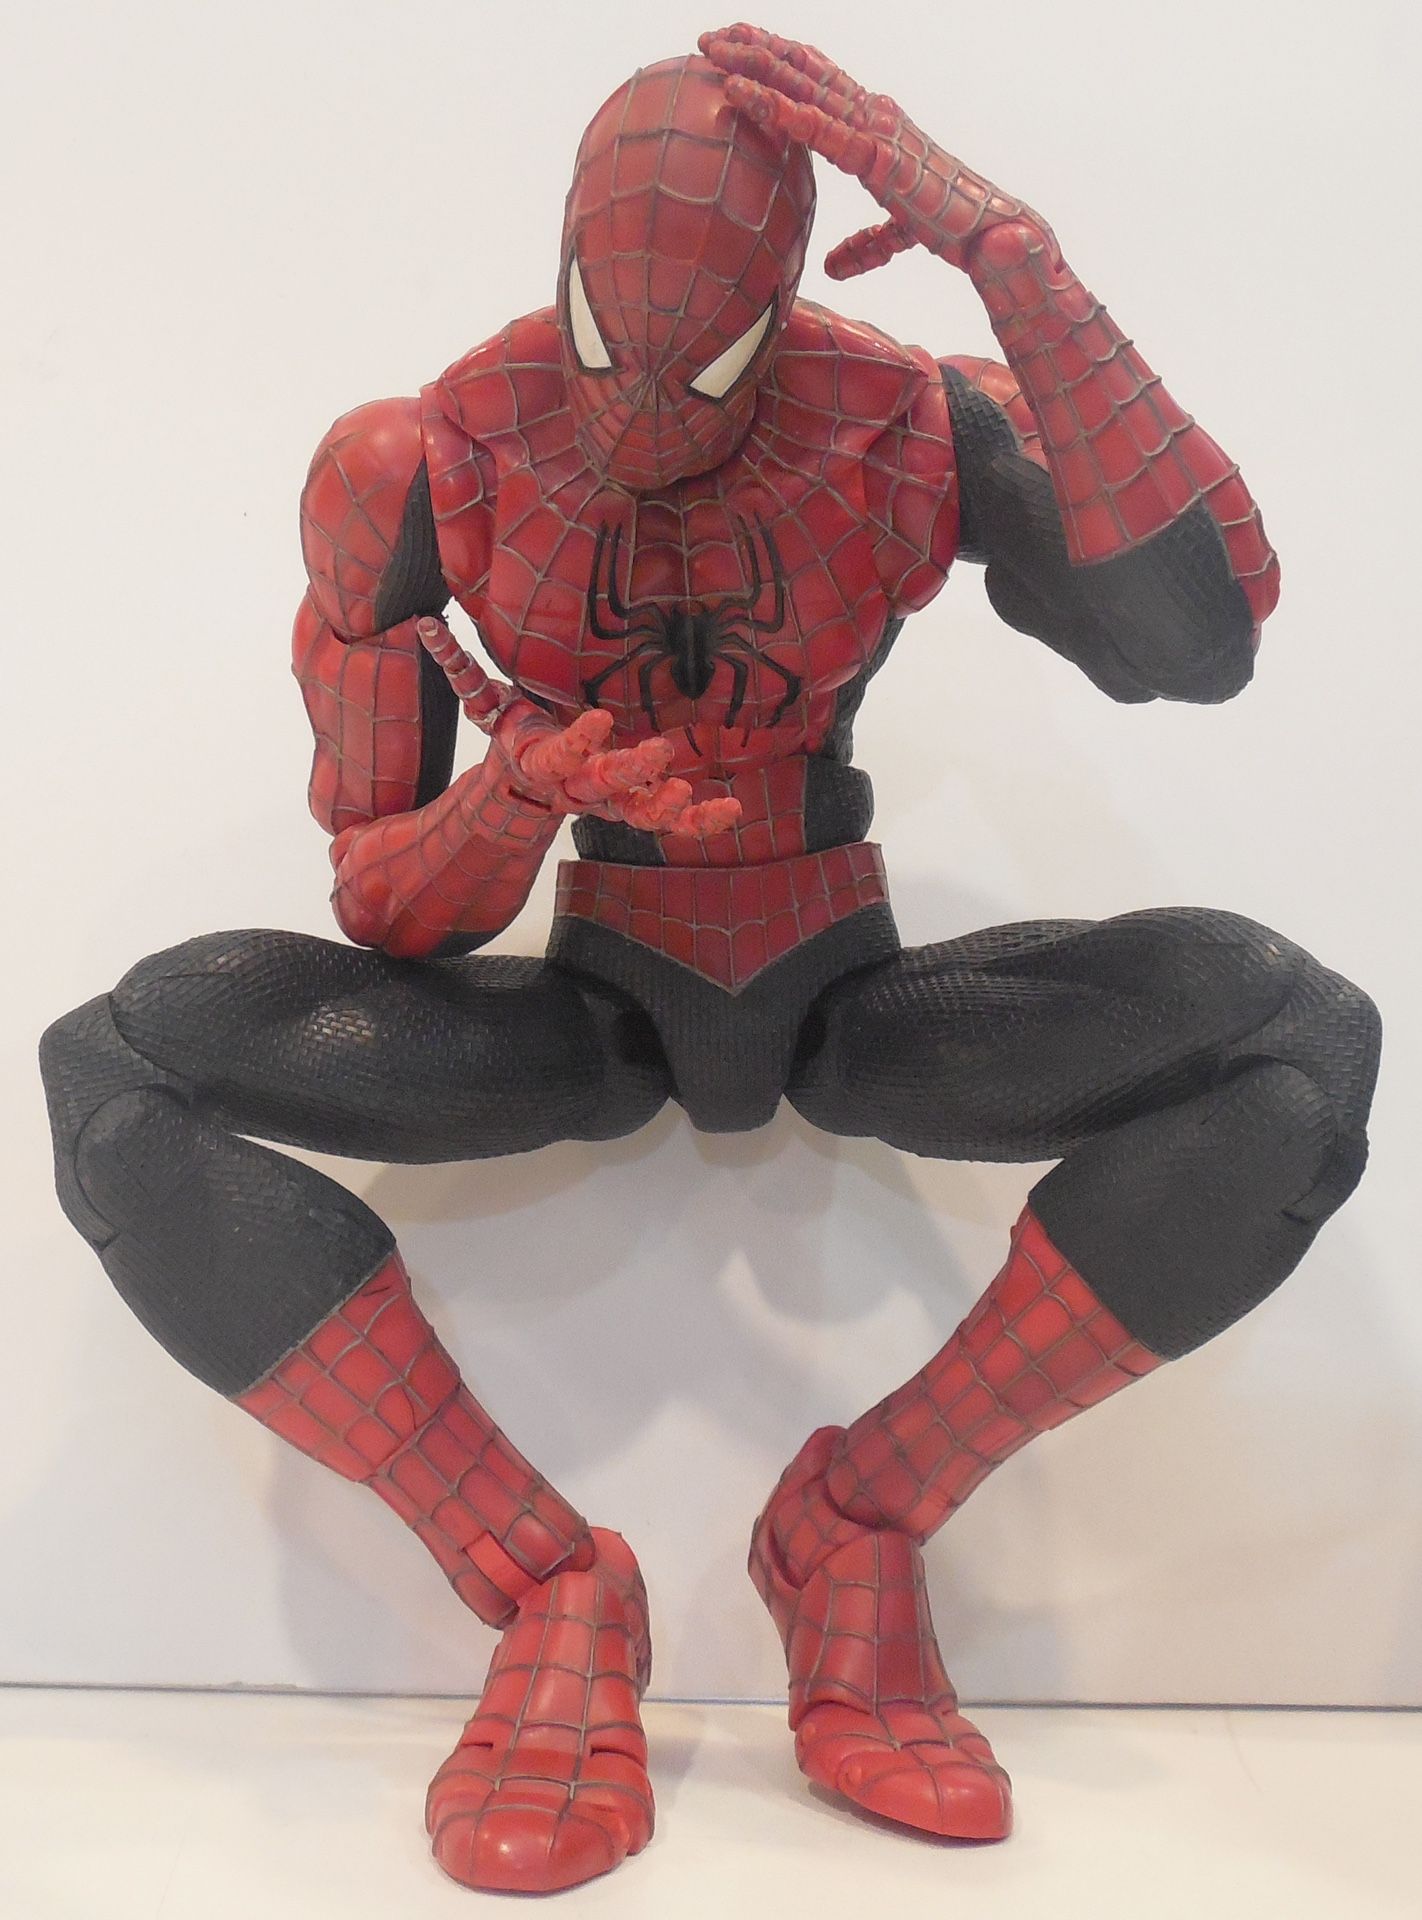 Spider-man super poseable 18inch action figure 67 points of articulation